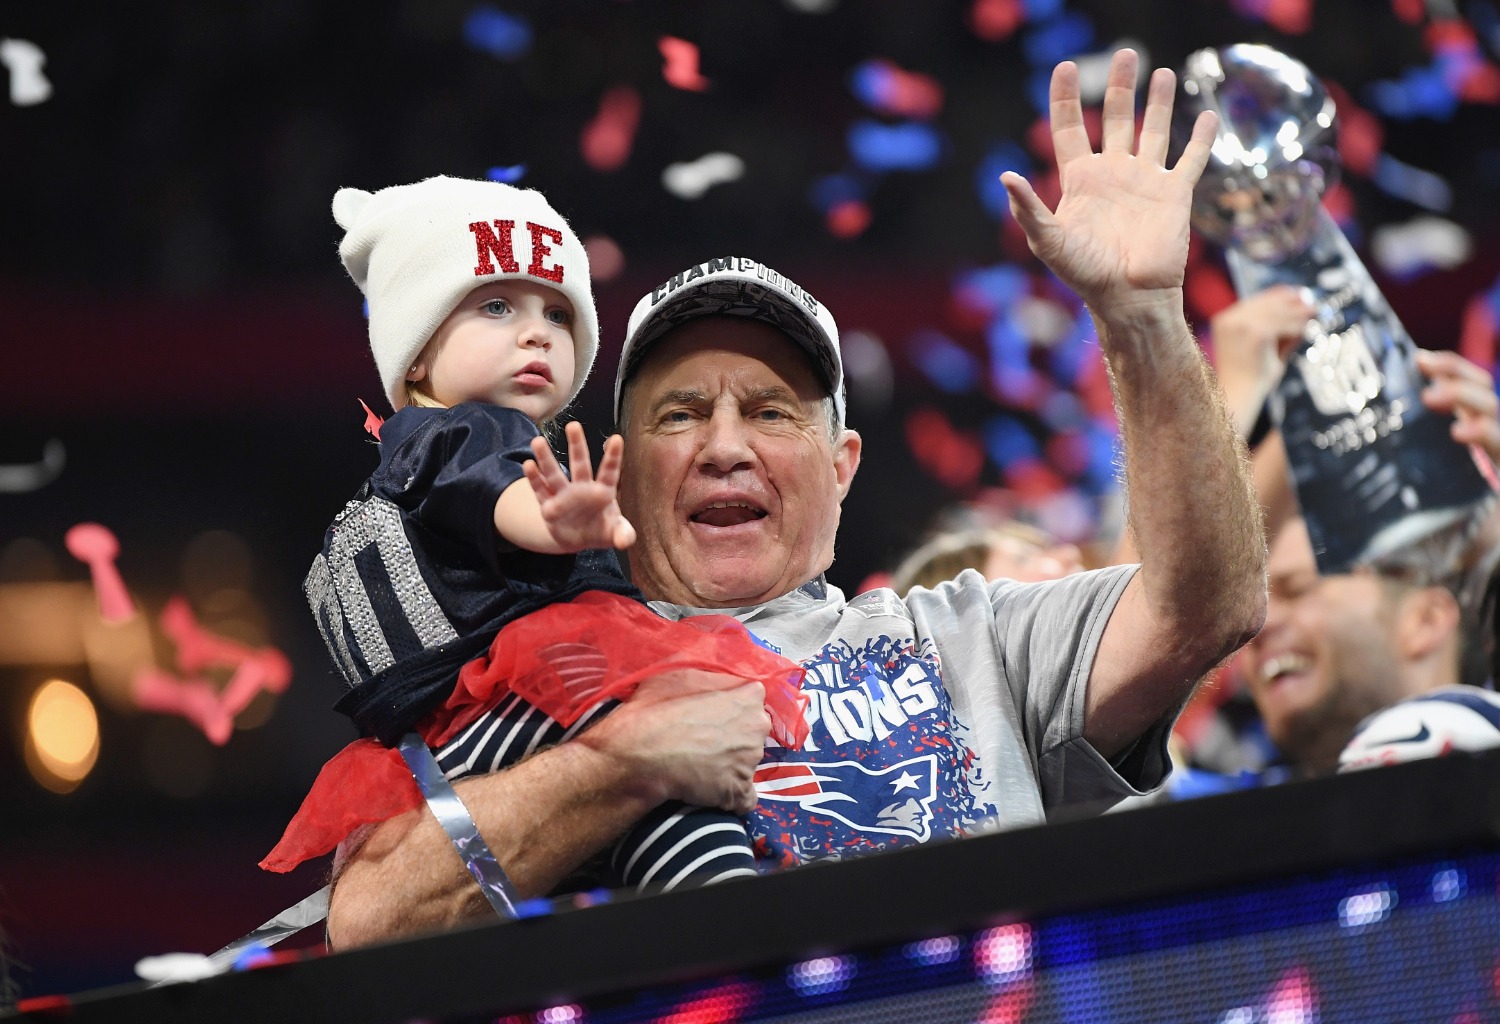 Patriots head coach Bill Belichick possesses a $50 million weapon to help extend the dynasty the dynasty he's built over two decades.